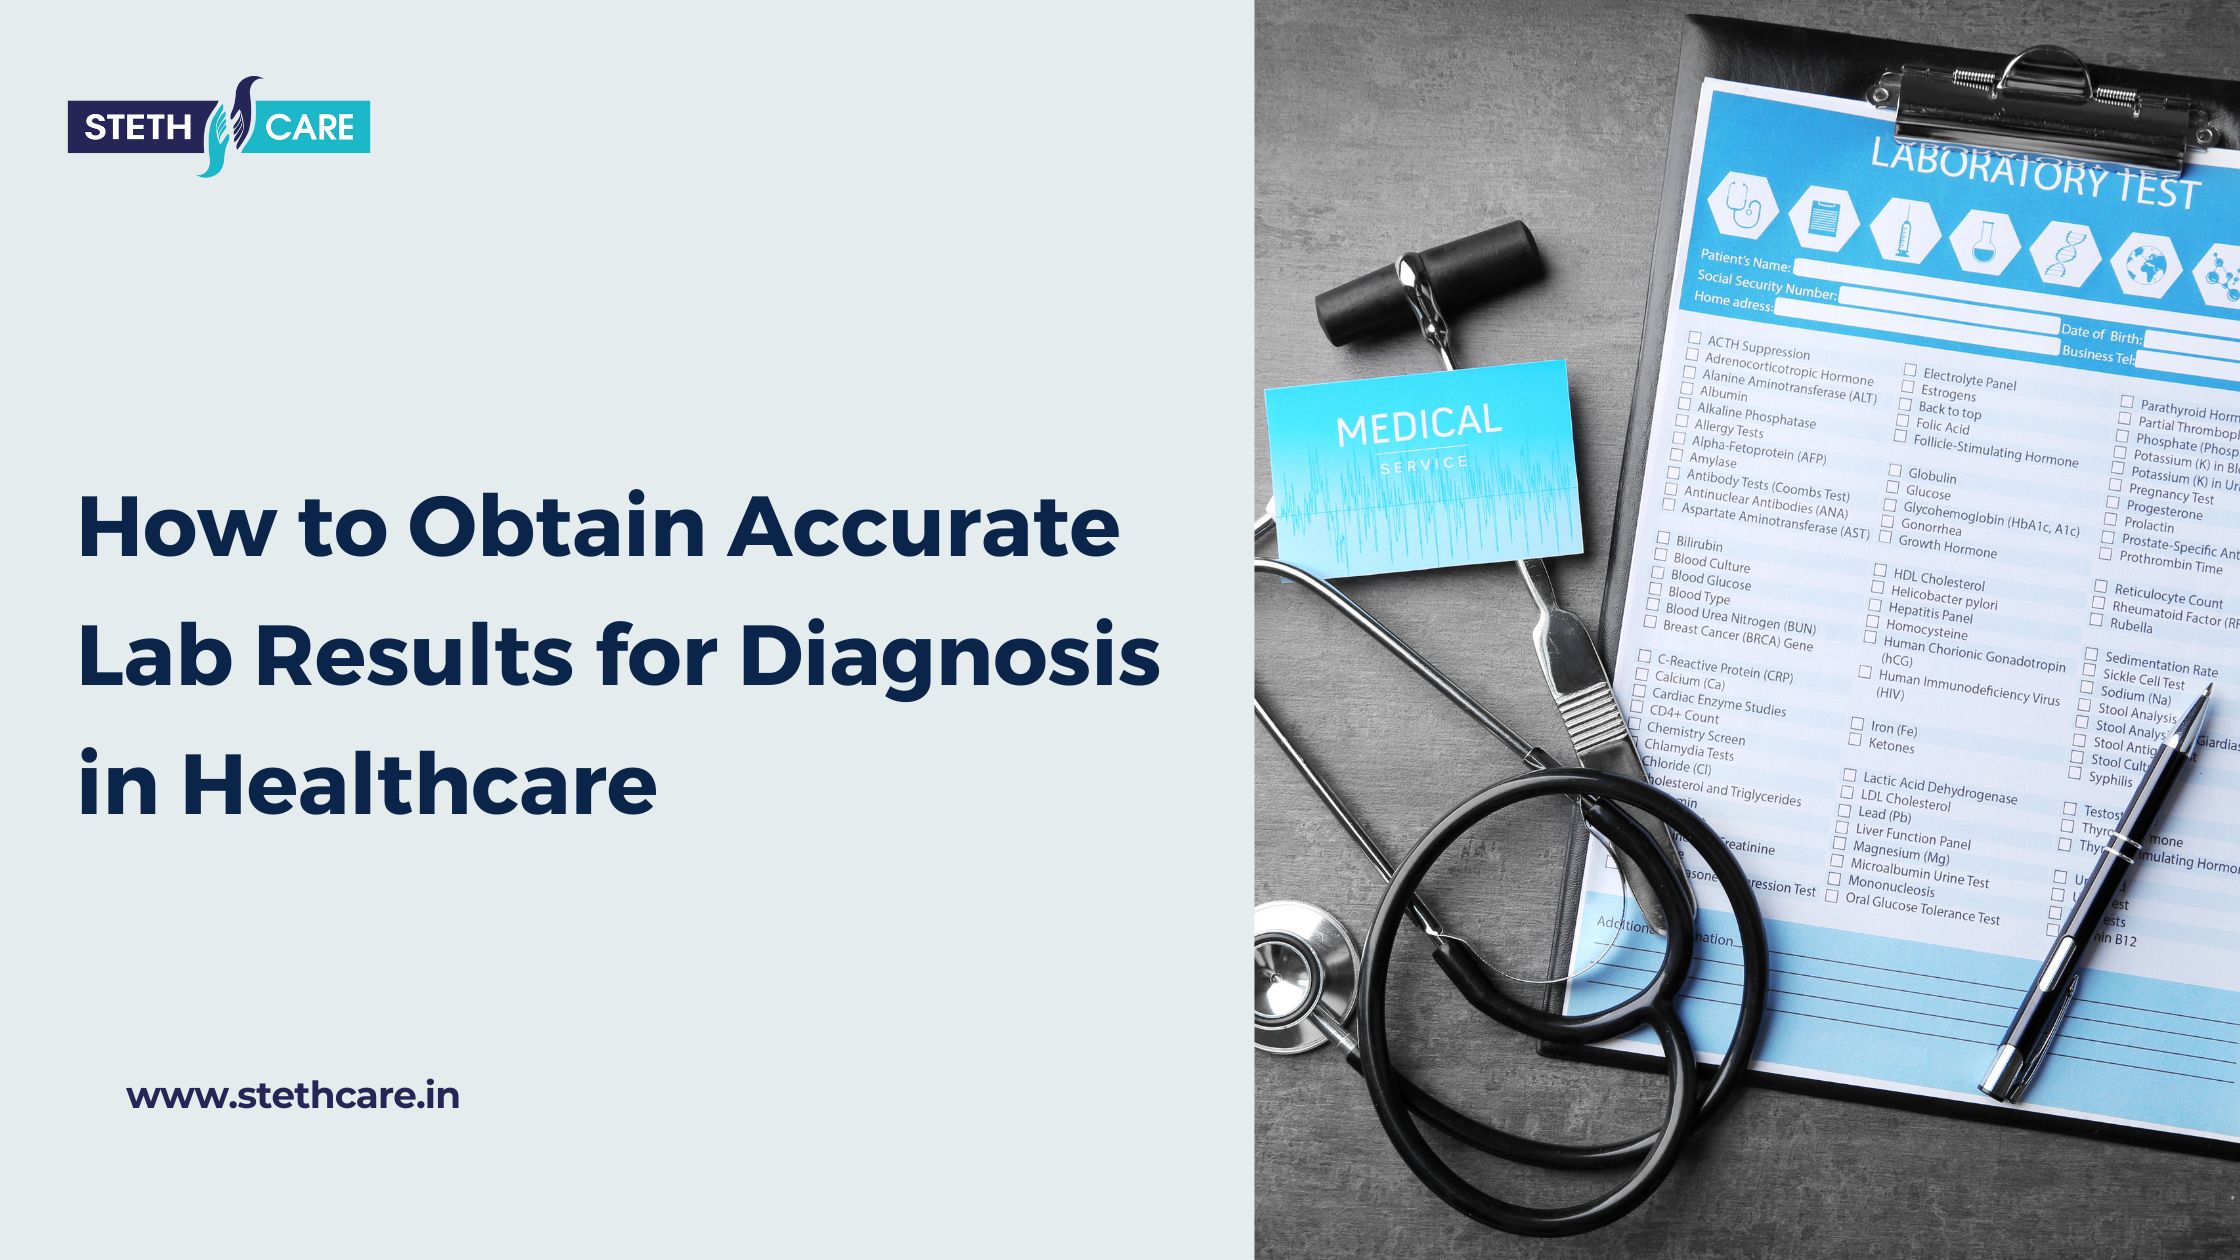 How to Obtain Accurate Lab Results for Diagnosis in Healthcare